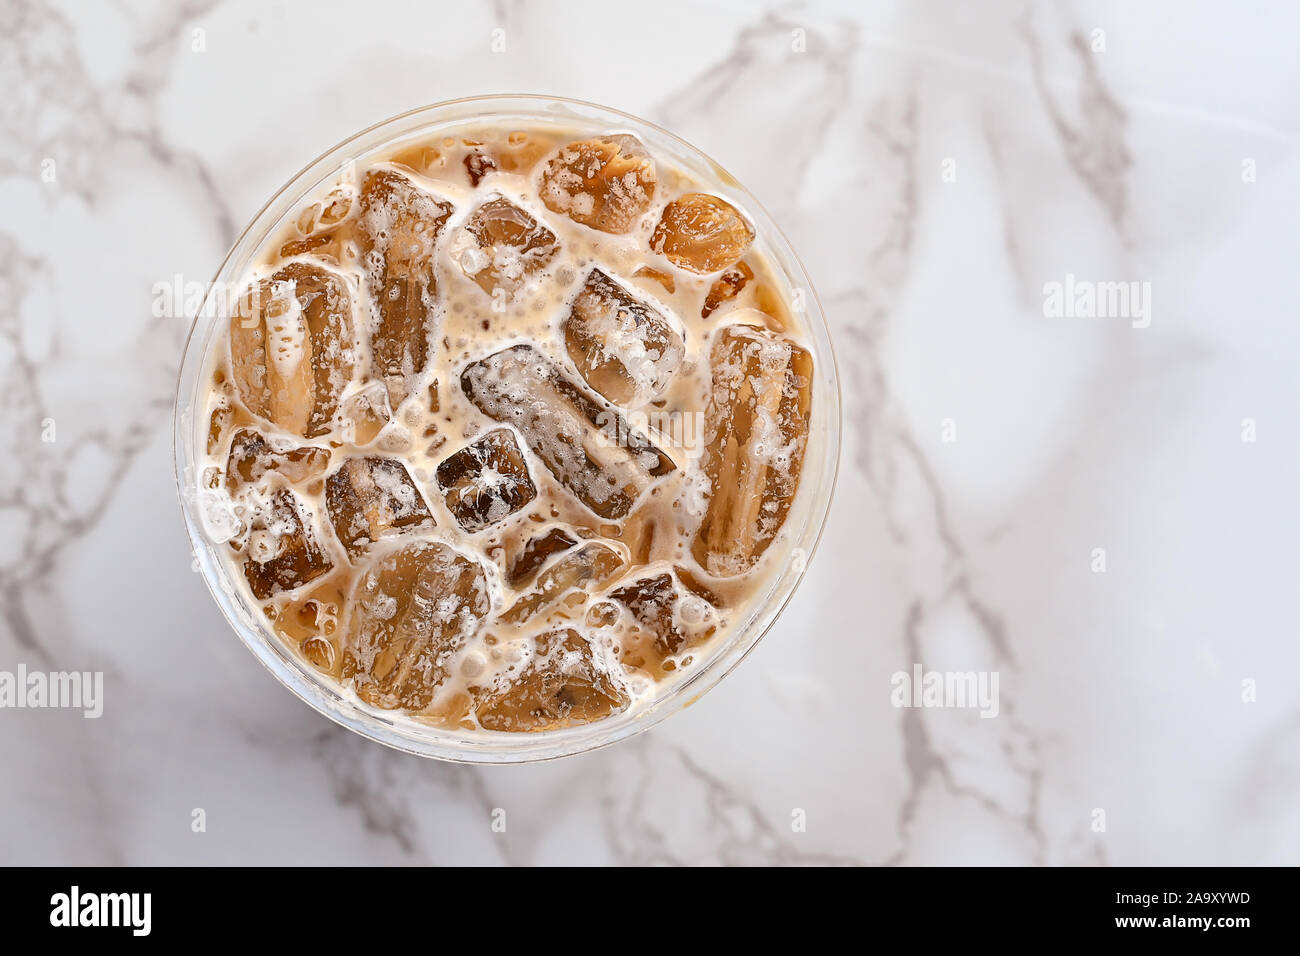 Iced coffee in cup plastic top view close up Stock Photo